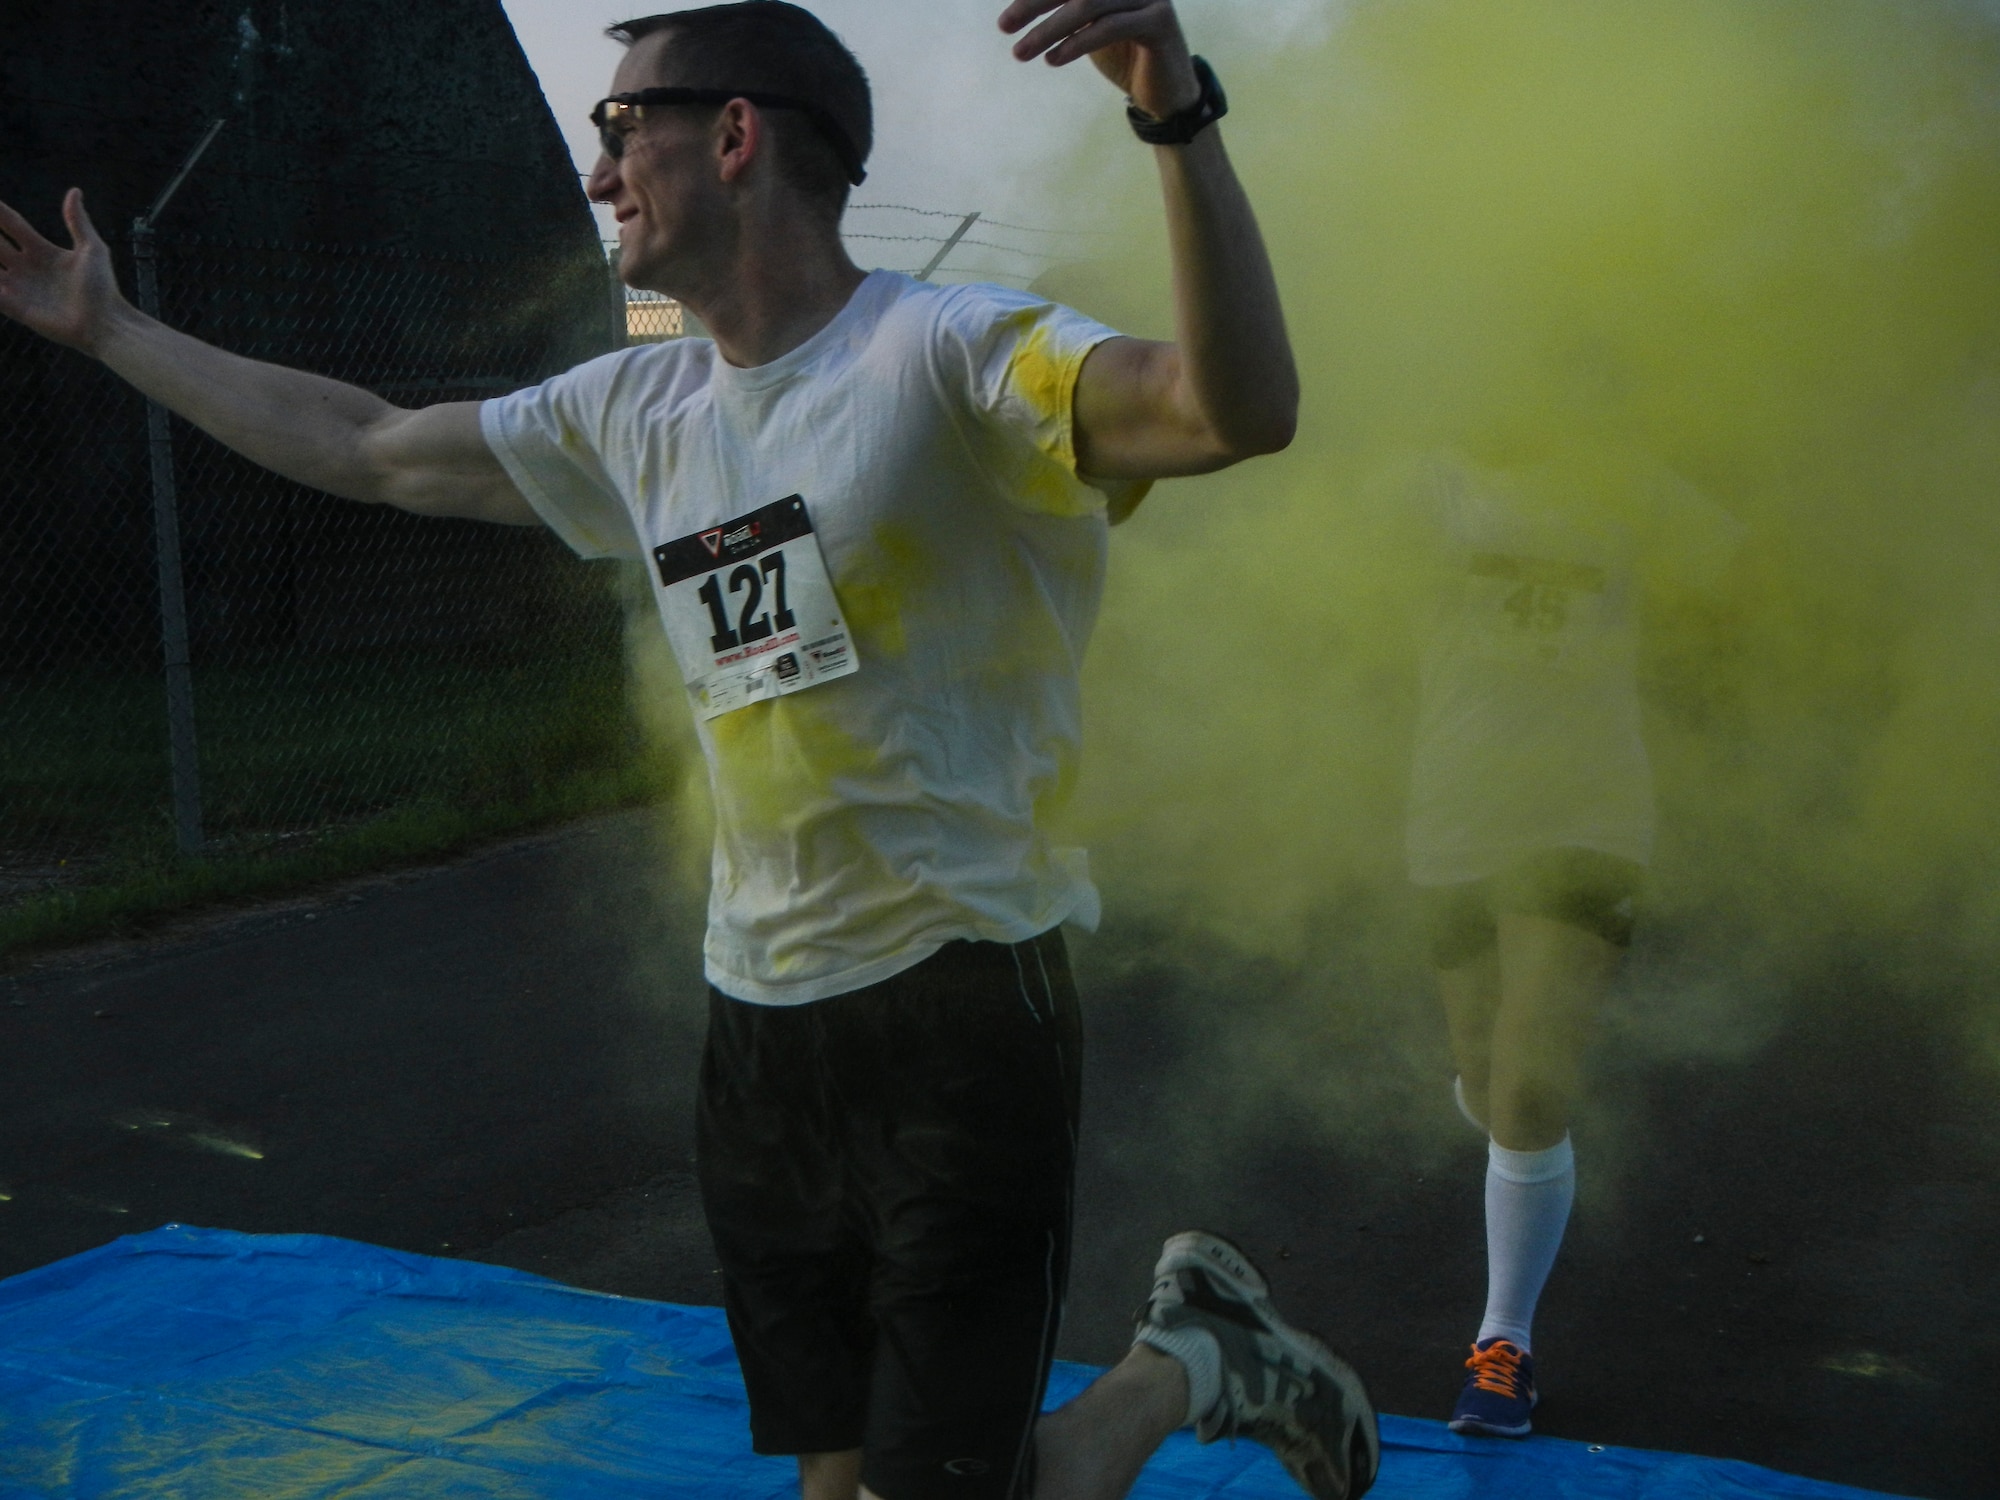 A color run participant is showered in color Aug. 21, 2014, during the Diversity Day 5K Color Run at Spangdahlem Air Base, Germany. Diversity Day held several events on base to highlight different cultures that are in the air force. (U.S. Air Force photo by Staff Sgt. Christopher Ruano/Released)